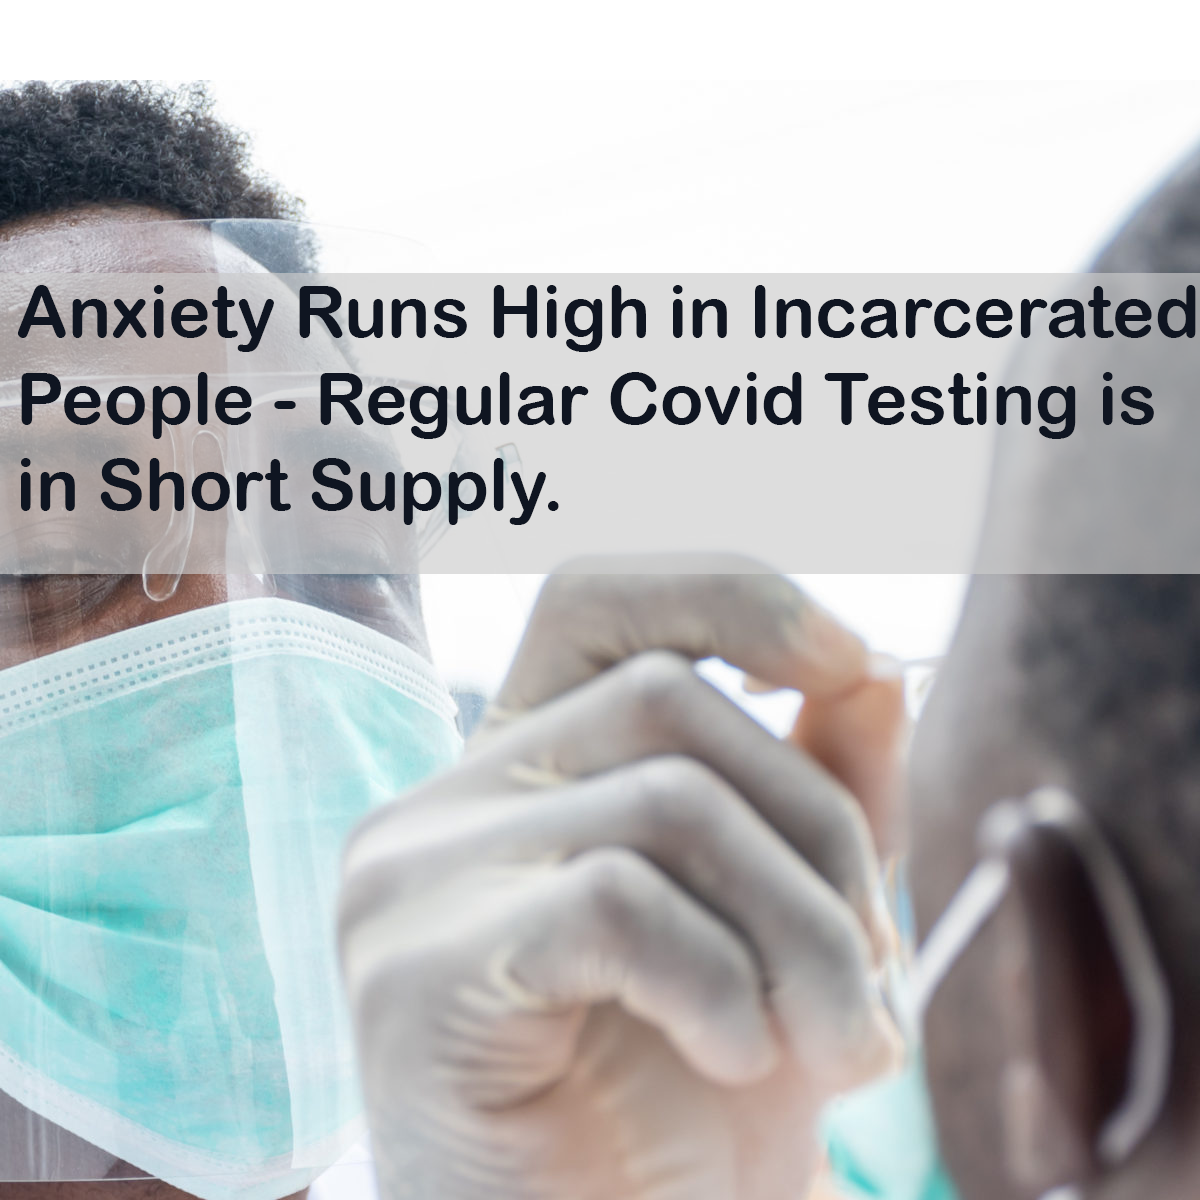 Anxiety Runs High in Incarcerated People - Regular Covid Testing is in Short Supply.